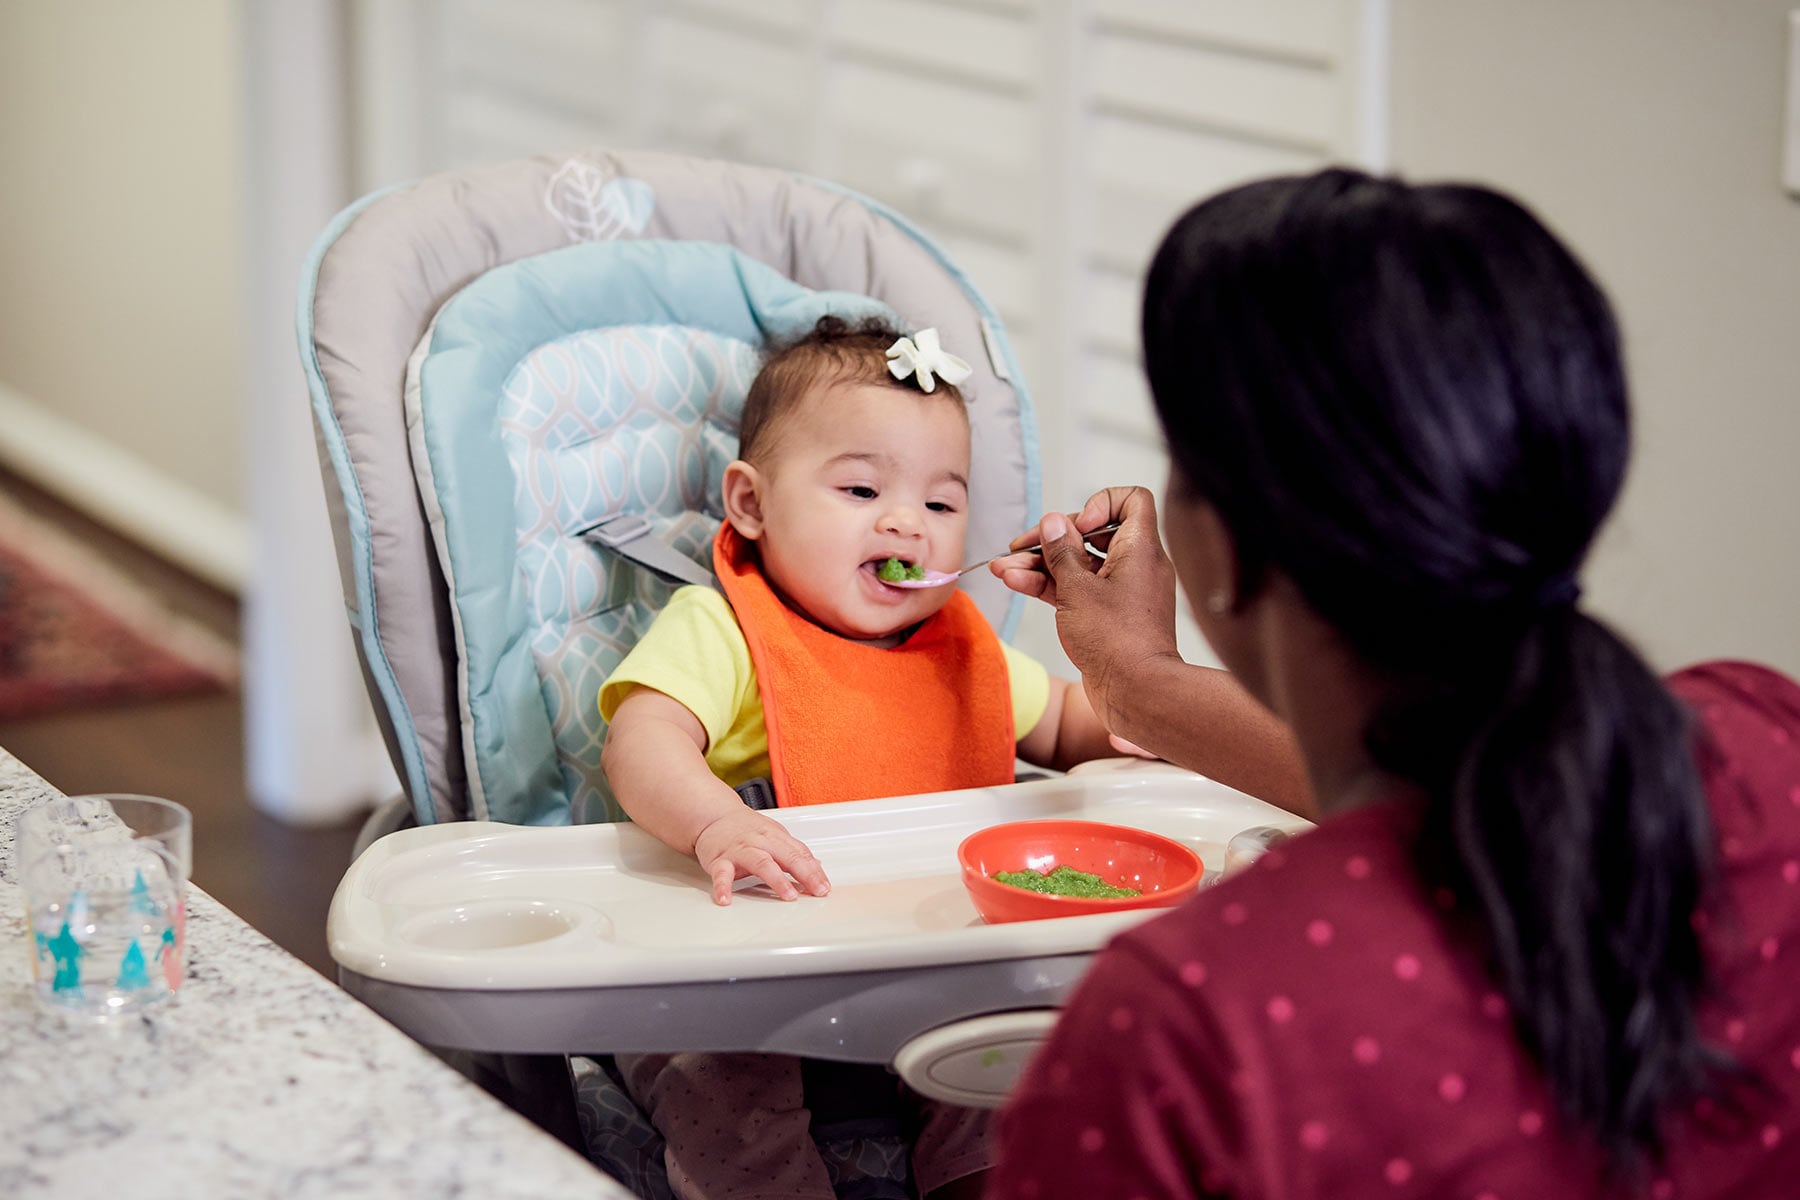 https://www.strong4life.com/-/media/Strong4Life/Pages/Healthy-Eating/Articles/How-Your-Baby-Develops-Taste-Preferences/SLP17_AA_5m_Spoon_feeding_opening_mouth_6608.jpg